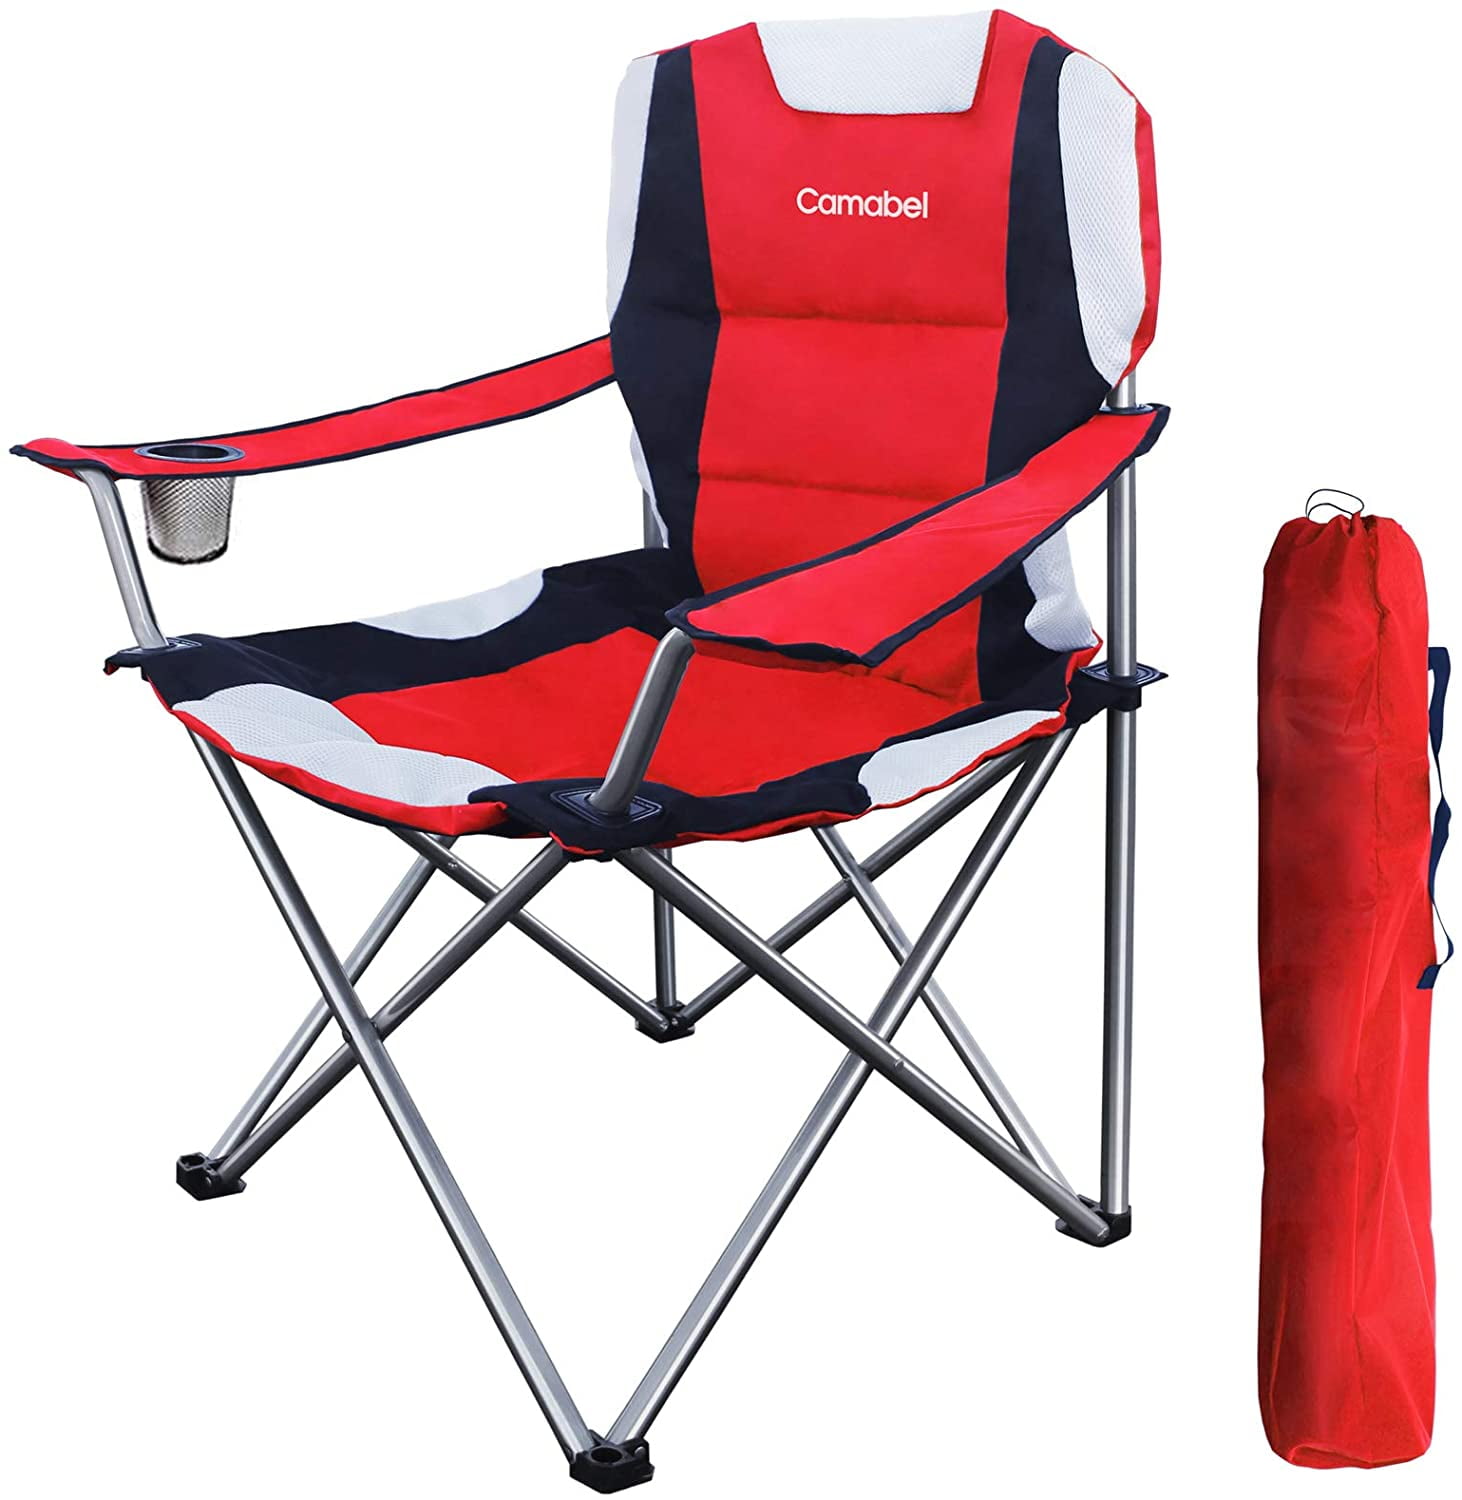 Heavy Duty Folding Outdoor Camping Chair Padded Comfort Seat with Removable Lumbar Back Support Pillow Cup Holder and Side Pockets Camp Supports to 300 lbs Patio for Outdoor Indoor Fishing